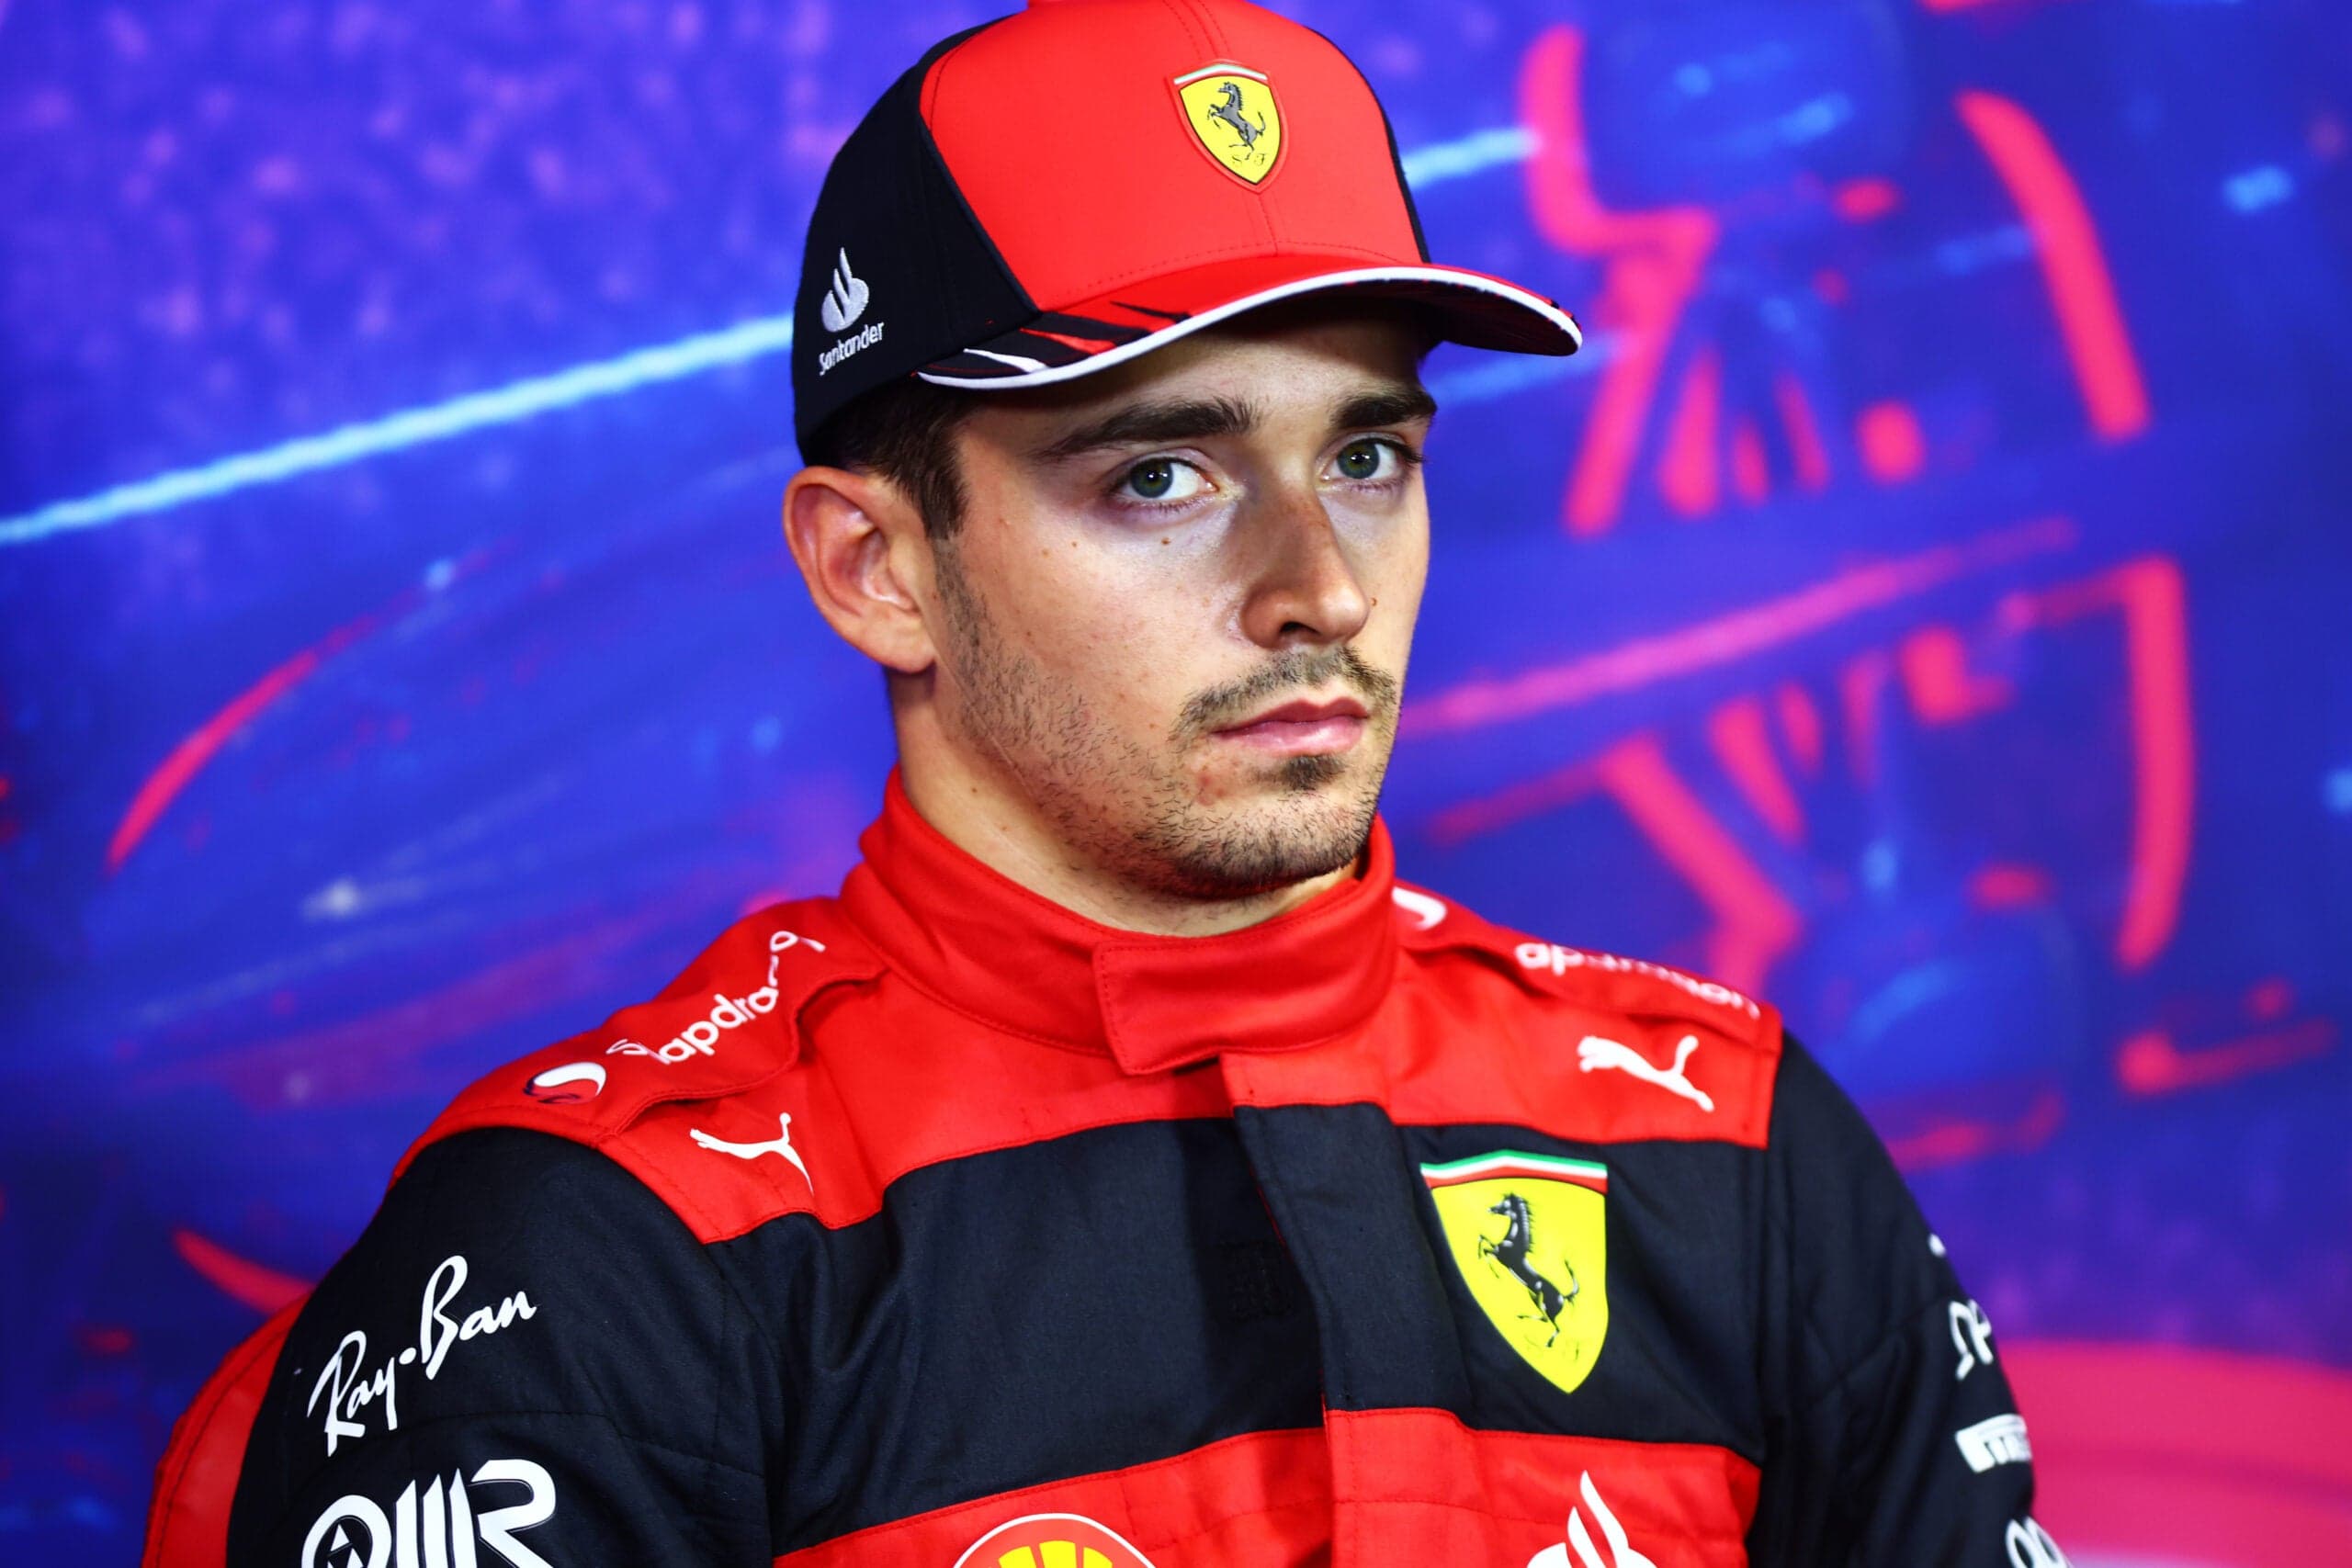 Charles Leclerc with the expression of a man who drives for Ferrari